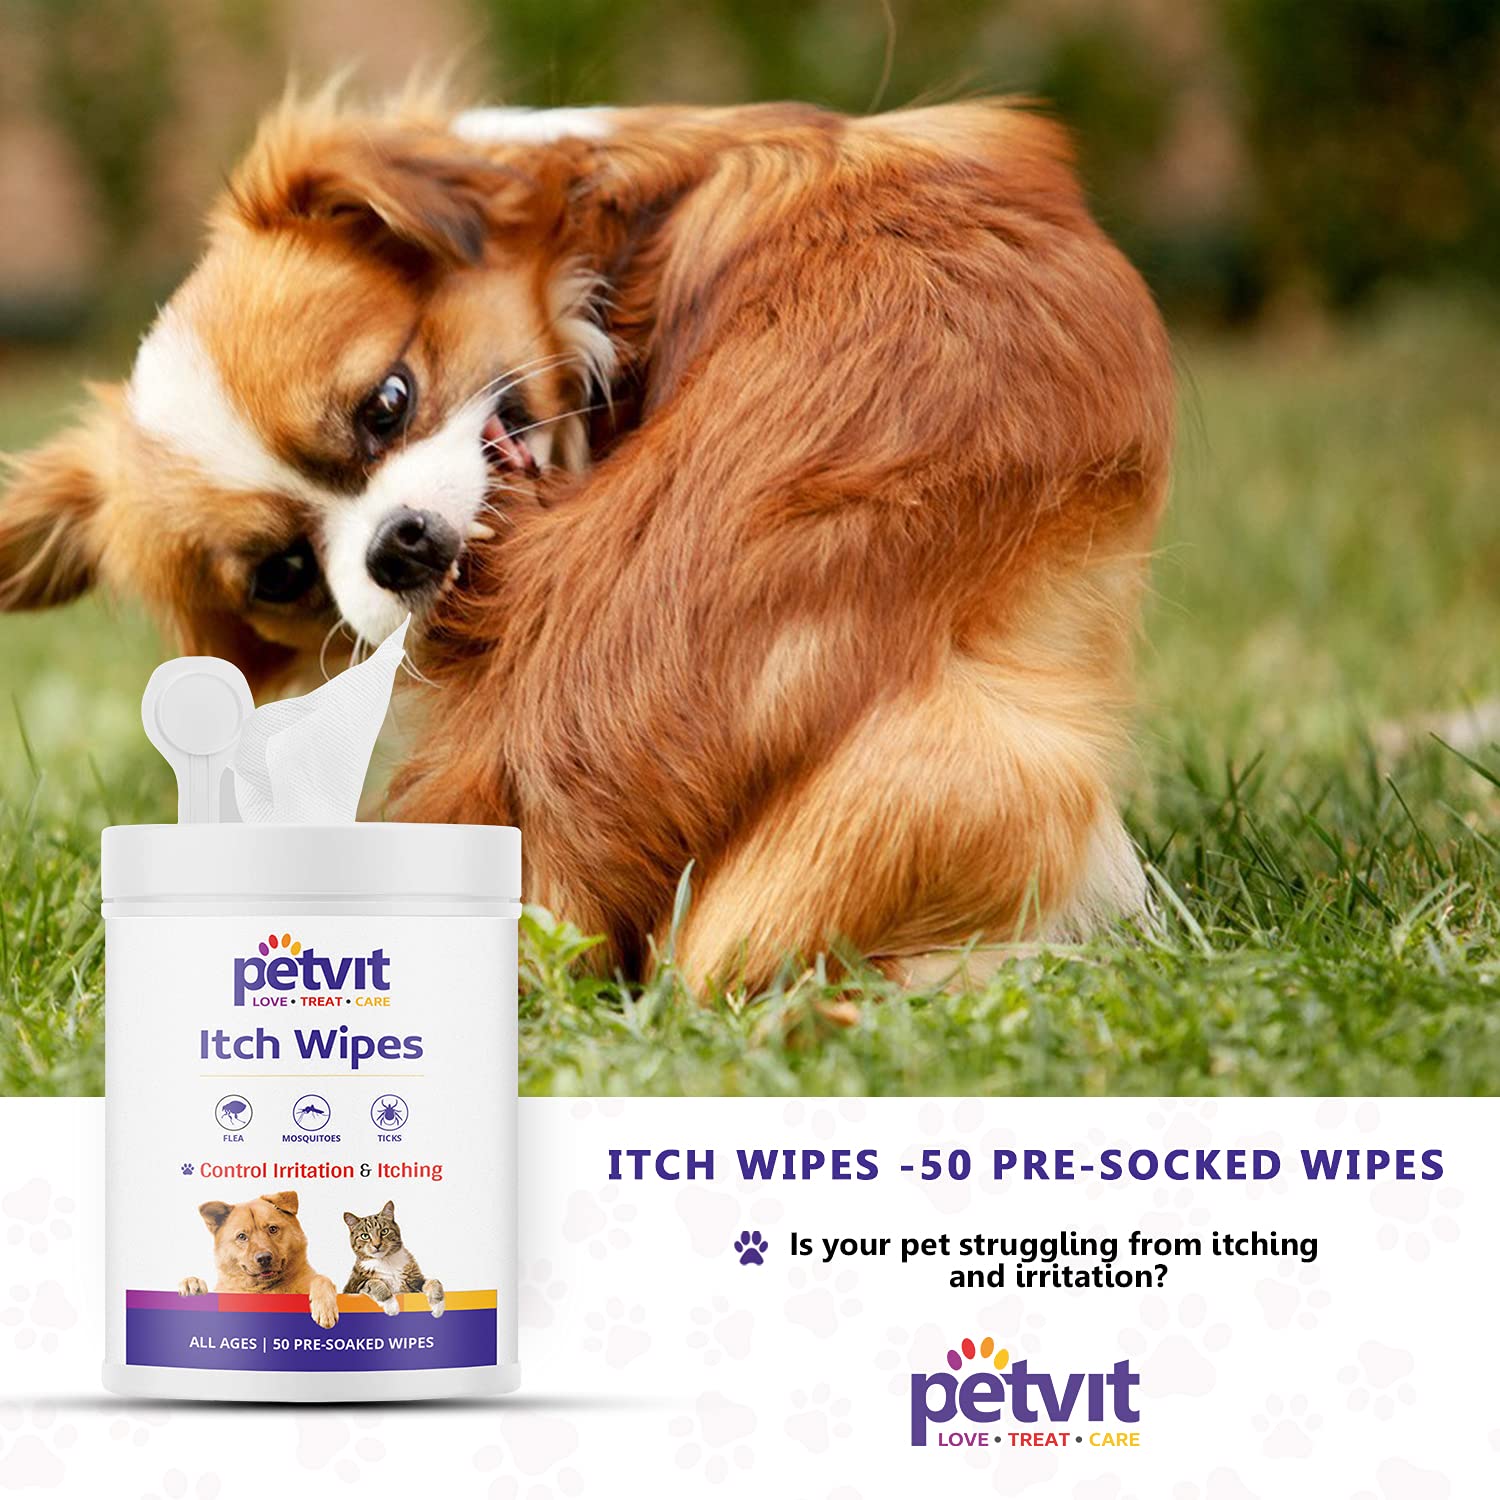 Petvit Itch Wipes for Relief Skin Irritations and Scratching |with Aloe Vera Gel & Neem Extract| | Paraben Free & pH-Balance -for All Breed Dog & Cat - 50 Wipes for All Age Group